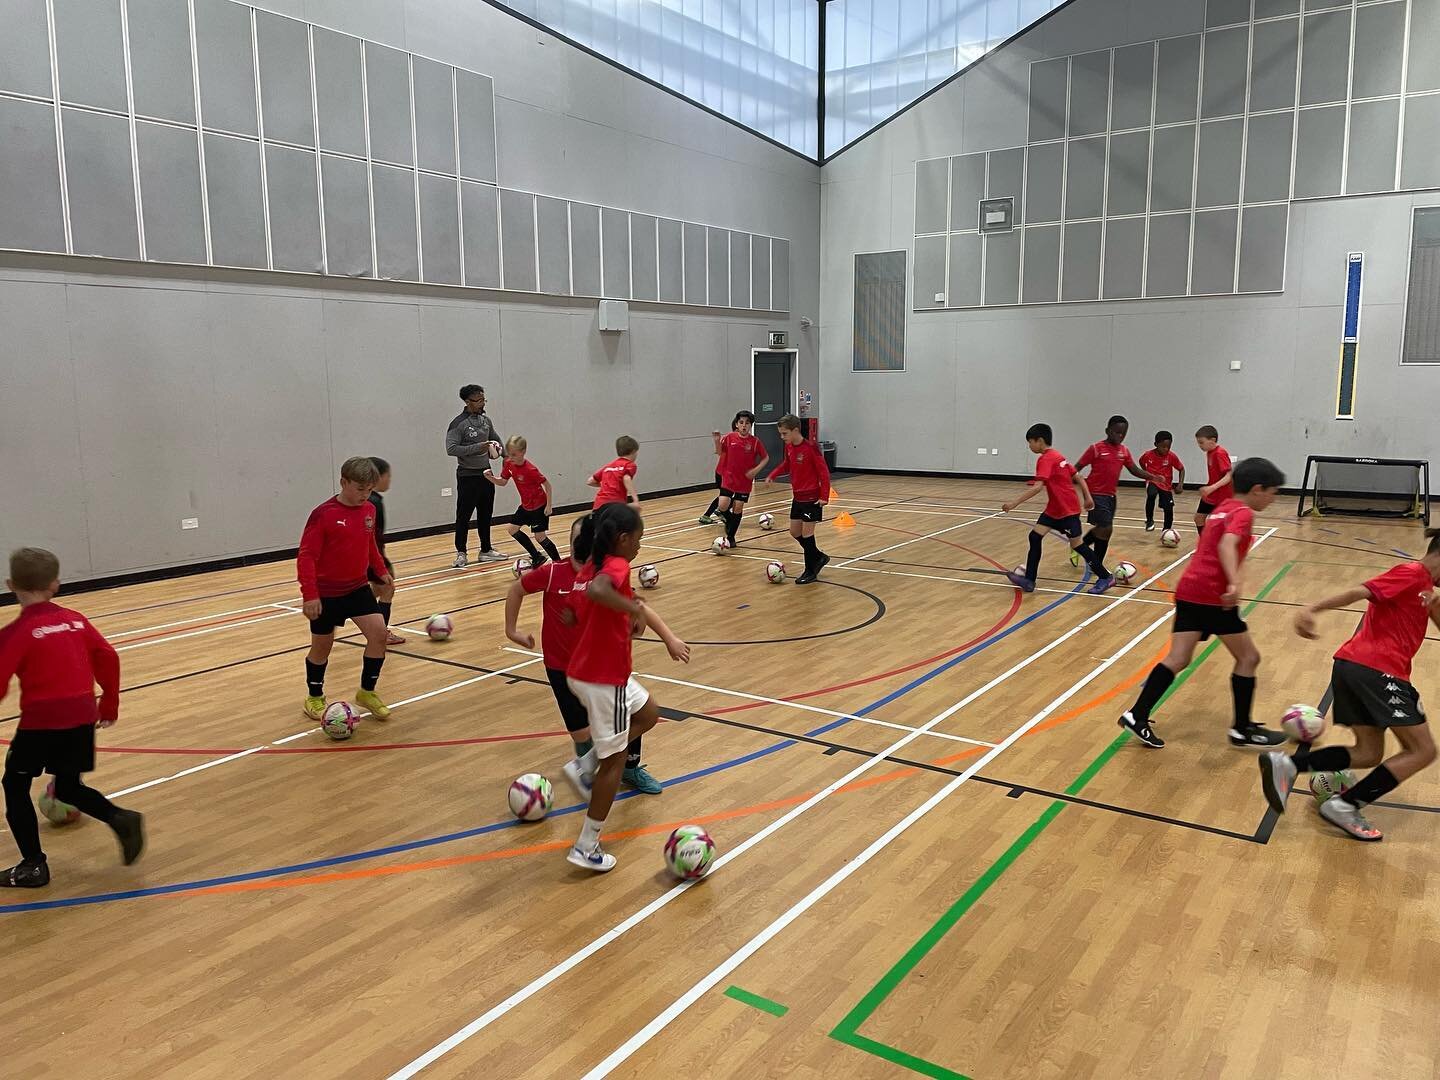 F U T S A L 💥
.
.
.
Tonight 🦾
.
.
Bromley College 🏆
.
.
FULL most age groups ⛔️
.
.
Waiting list for trials ✅
.
.
Register interest now 💯
.
.
.
.
#futsal #tekky #skill #levels #talent #speed #unique #technique #football #youth #bromley #beunique